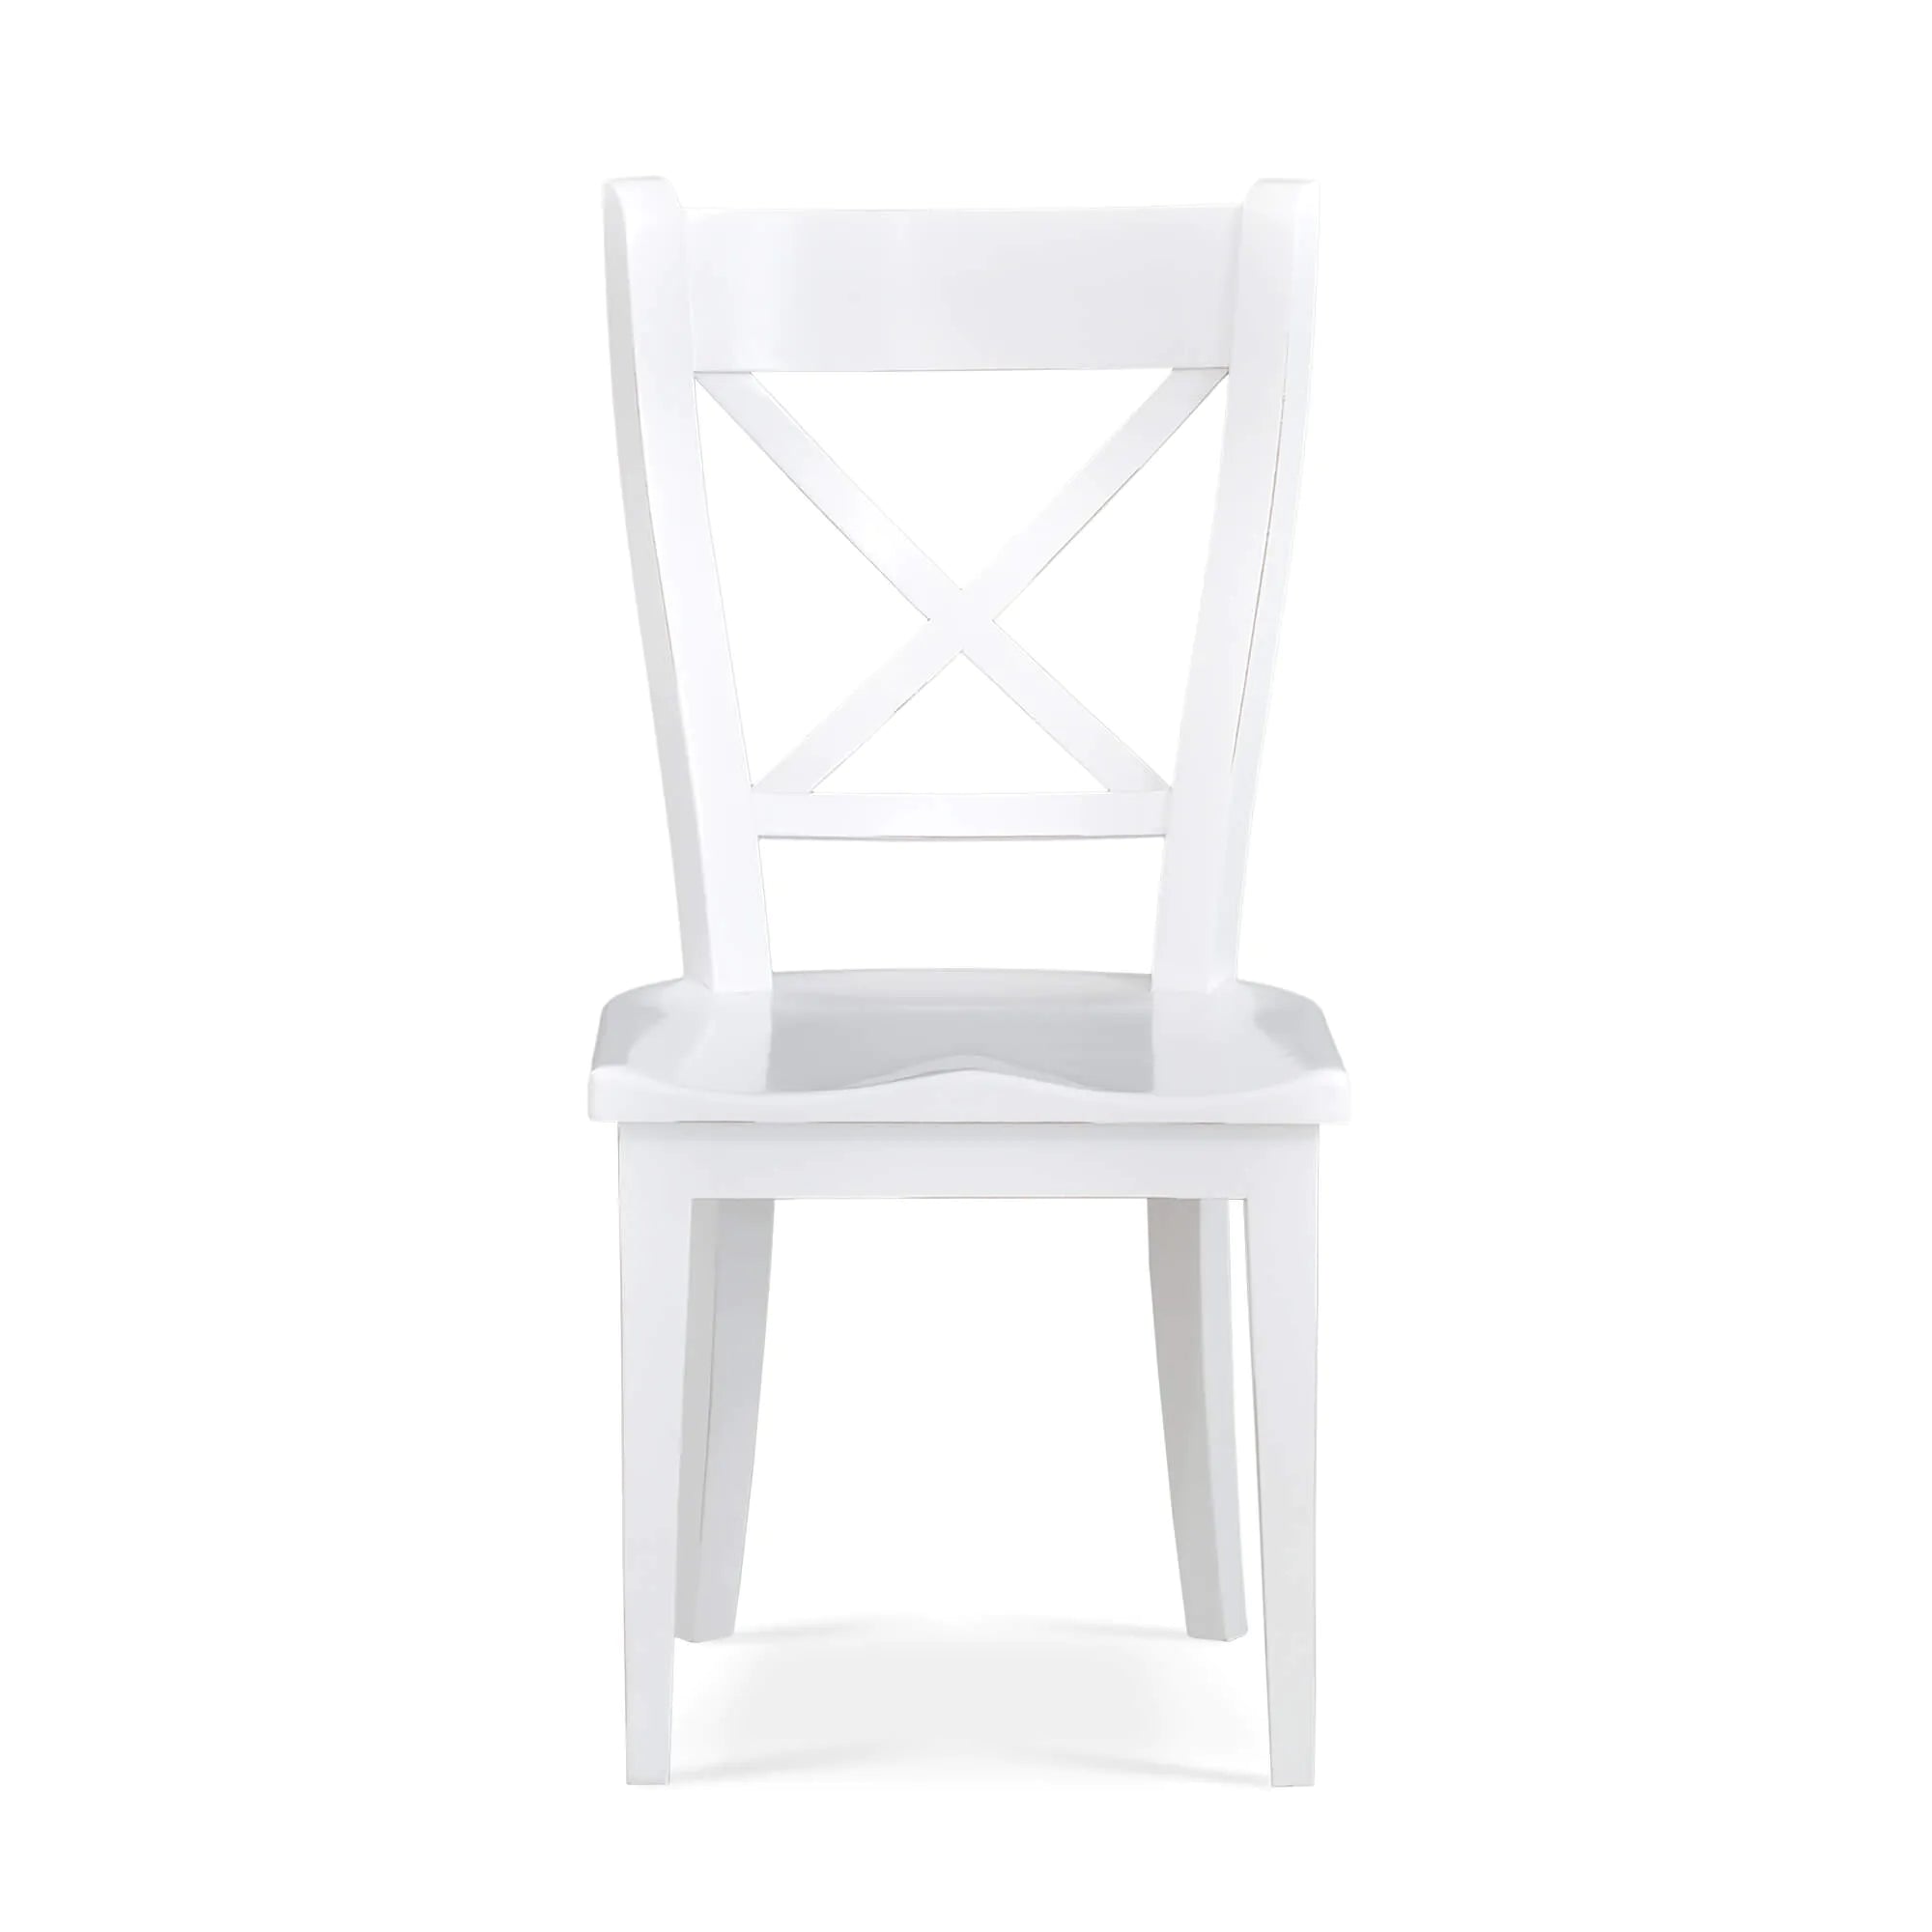 Summerset Chair Set of 4 Dining Chairs Architectural White, Light Distressed